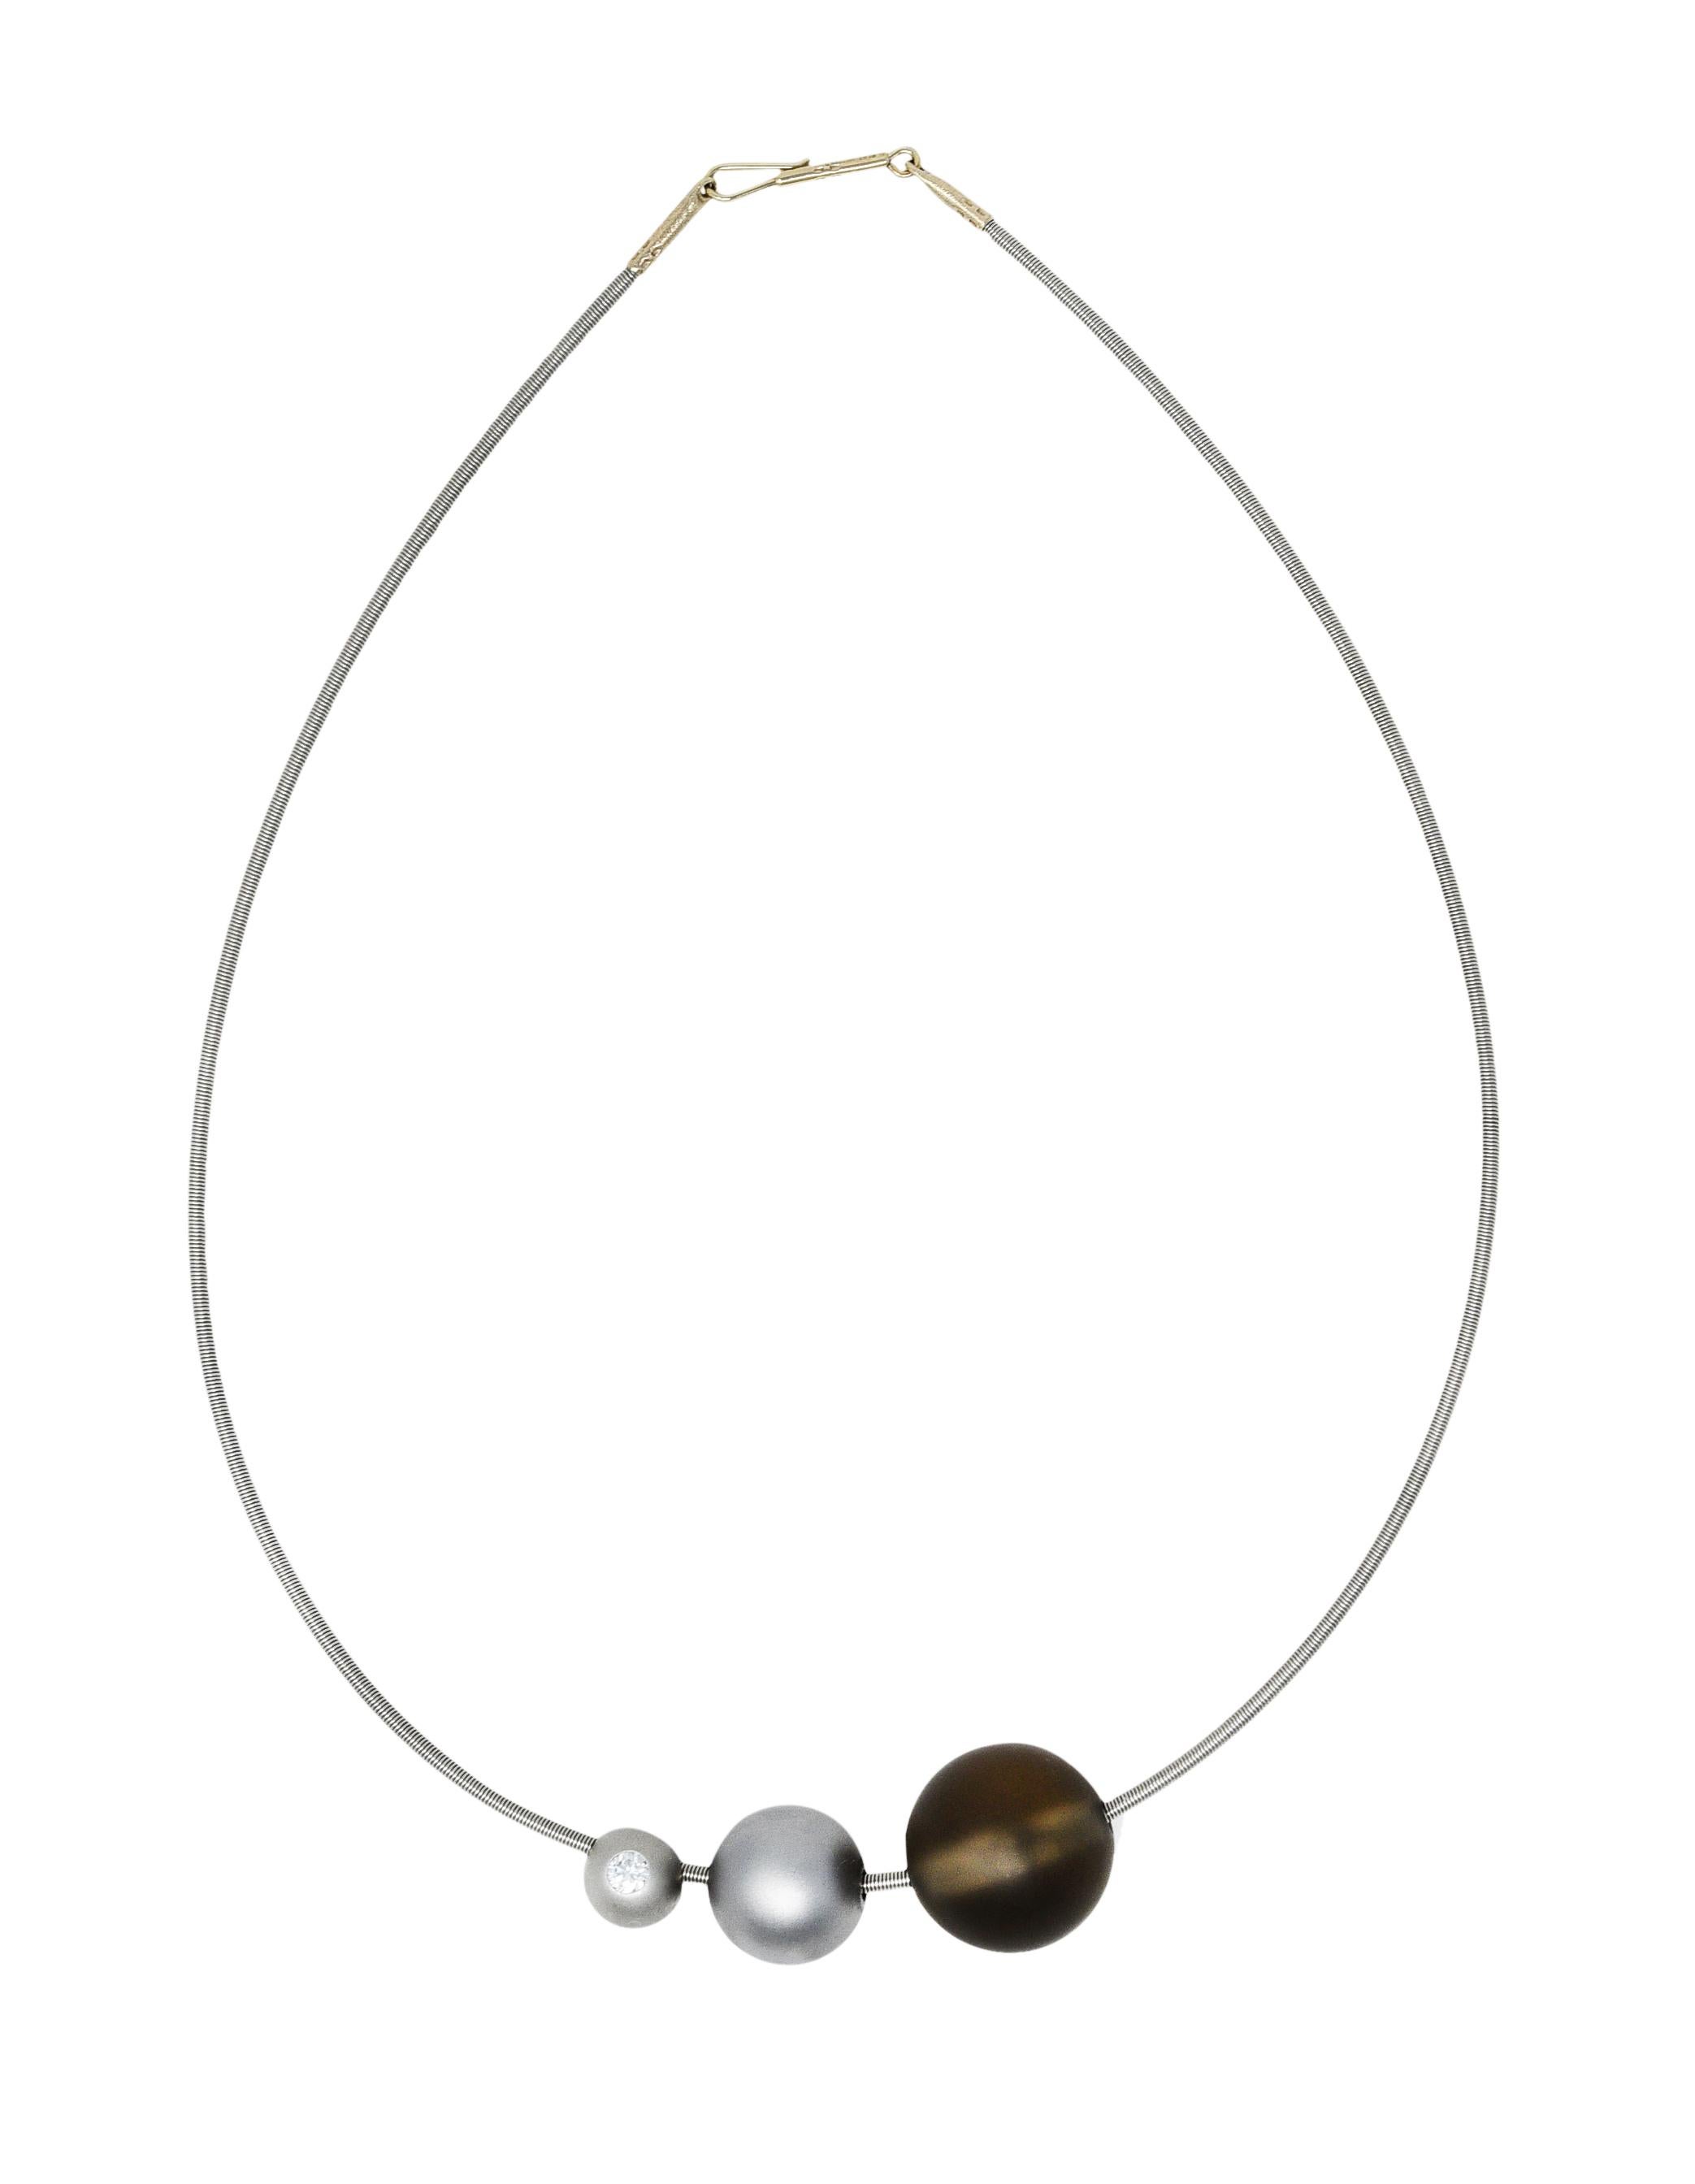 Collar necklace designed as coiled platinum chord strung with three spherical beads graduating in size

Two smaller beads are matte finish platinum and range in size from 9.0 mm to 14.0 mm

Smaller bead centers a flush set round brilliant cut